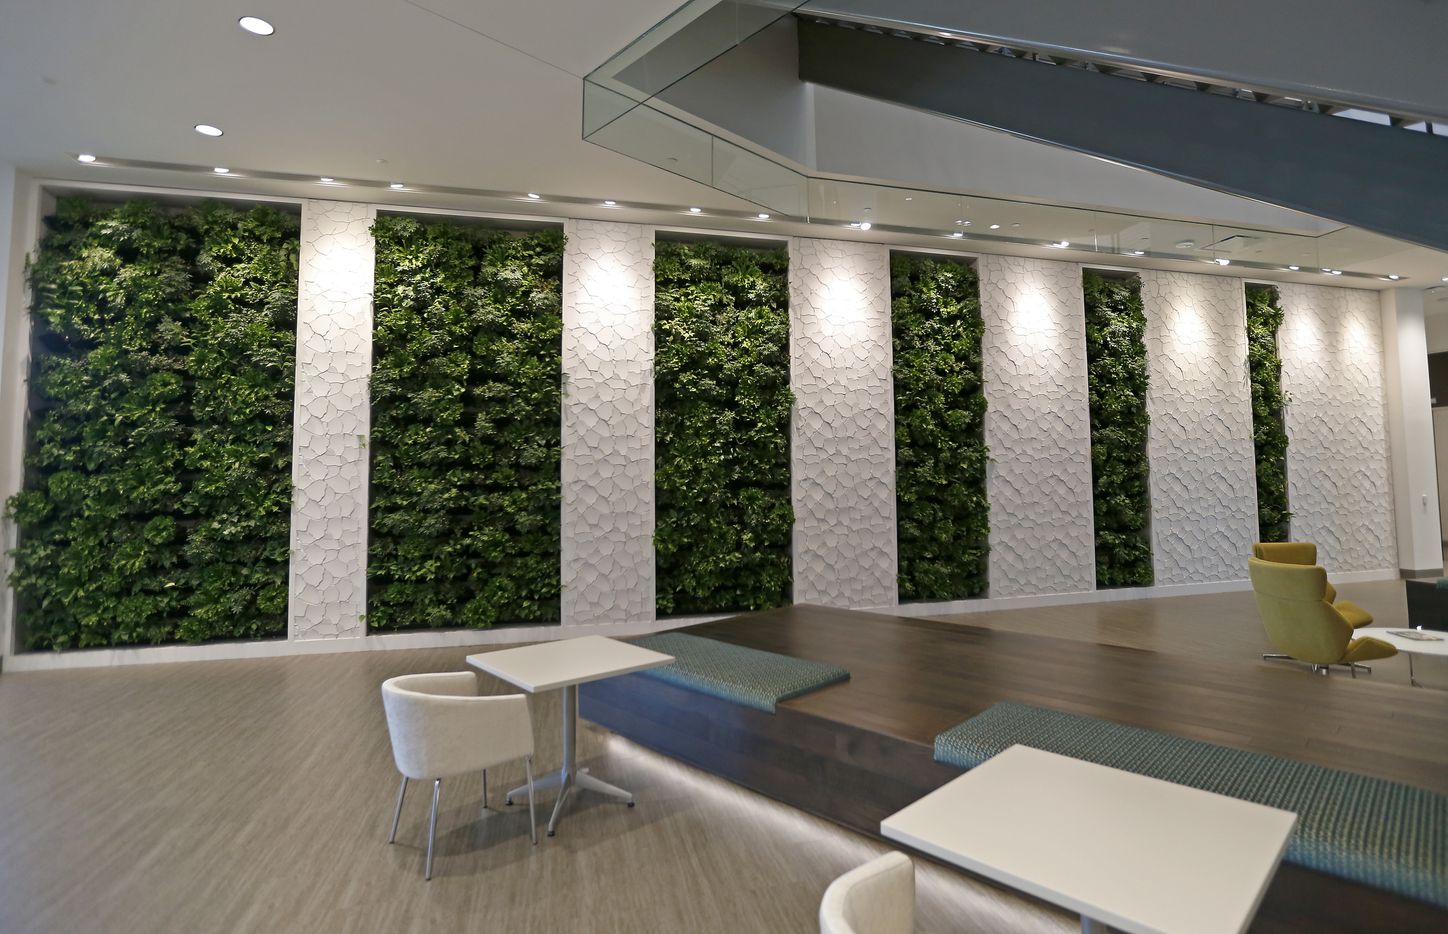 Vertical arrays of plants called the "living walls" is one of many features at the new...